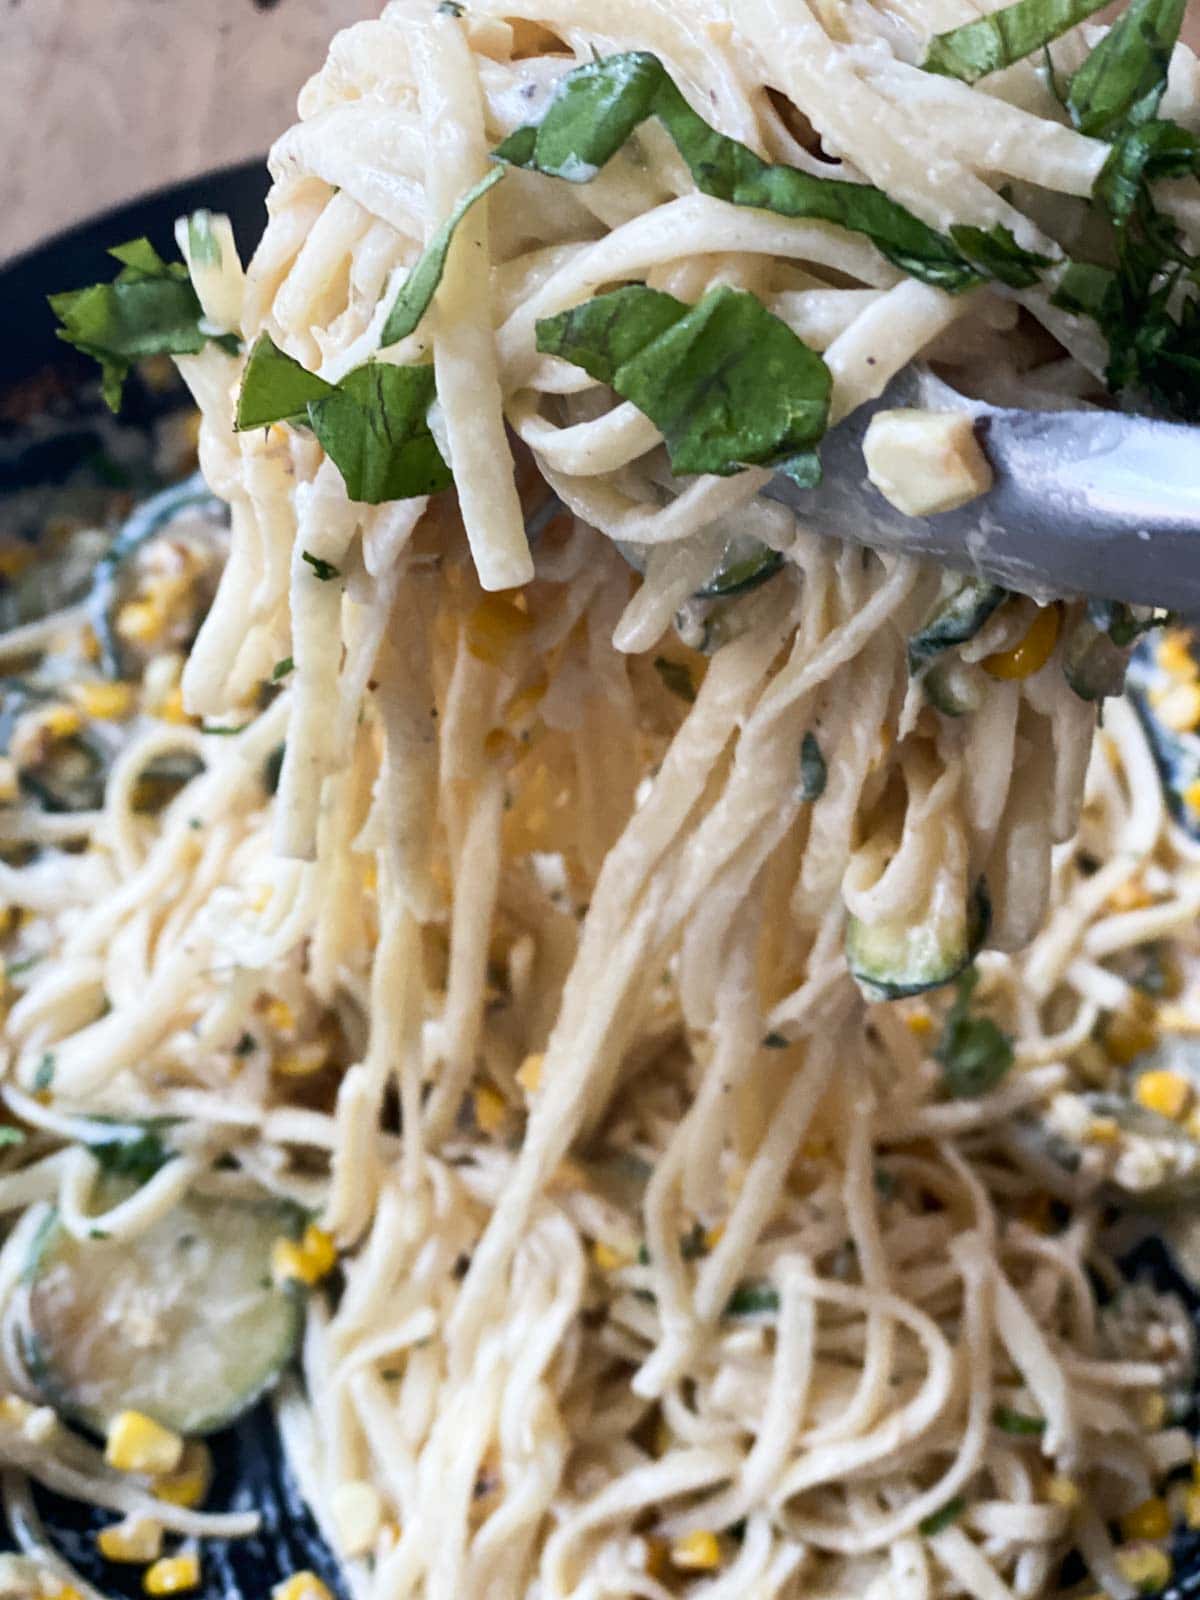 Tongs lifting pasta with basil on top.